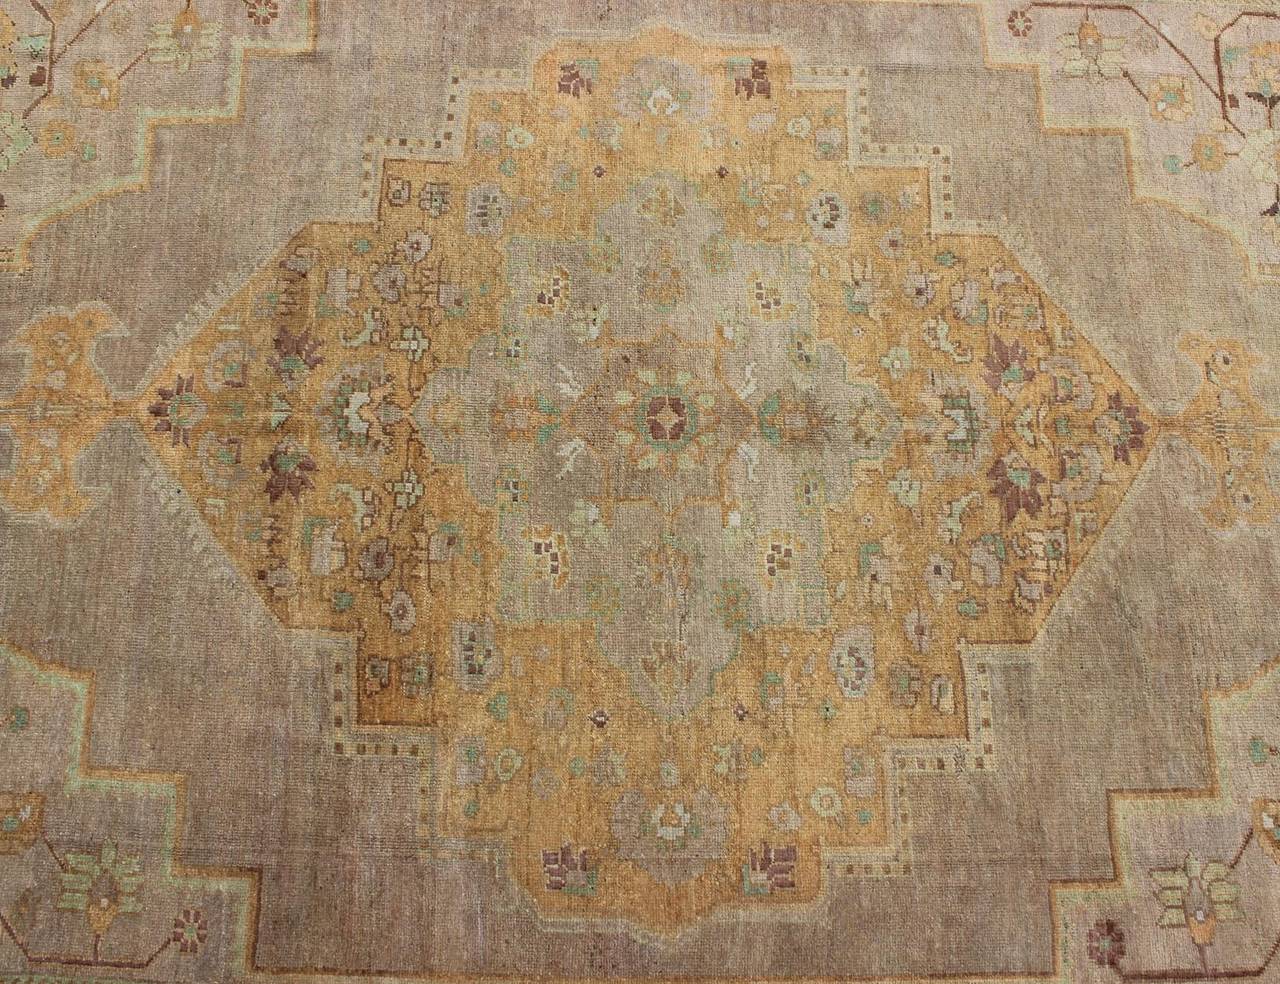 20th Century Oushak Rug with gold, brown and gray